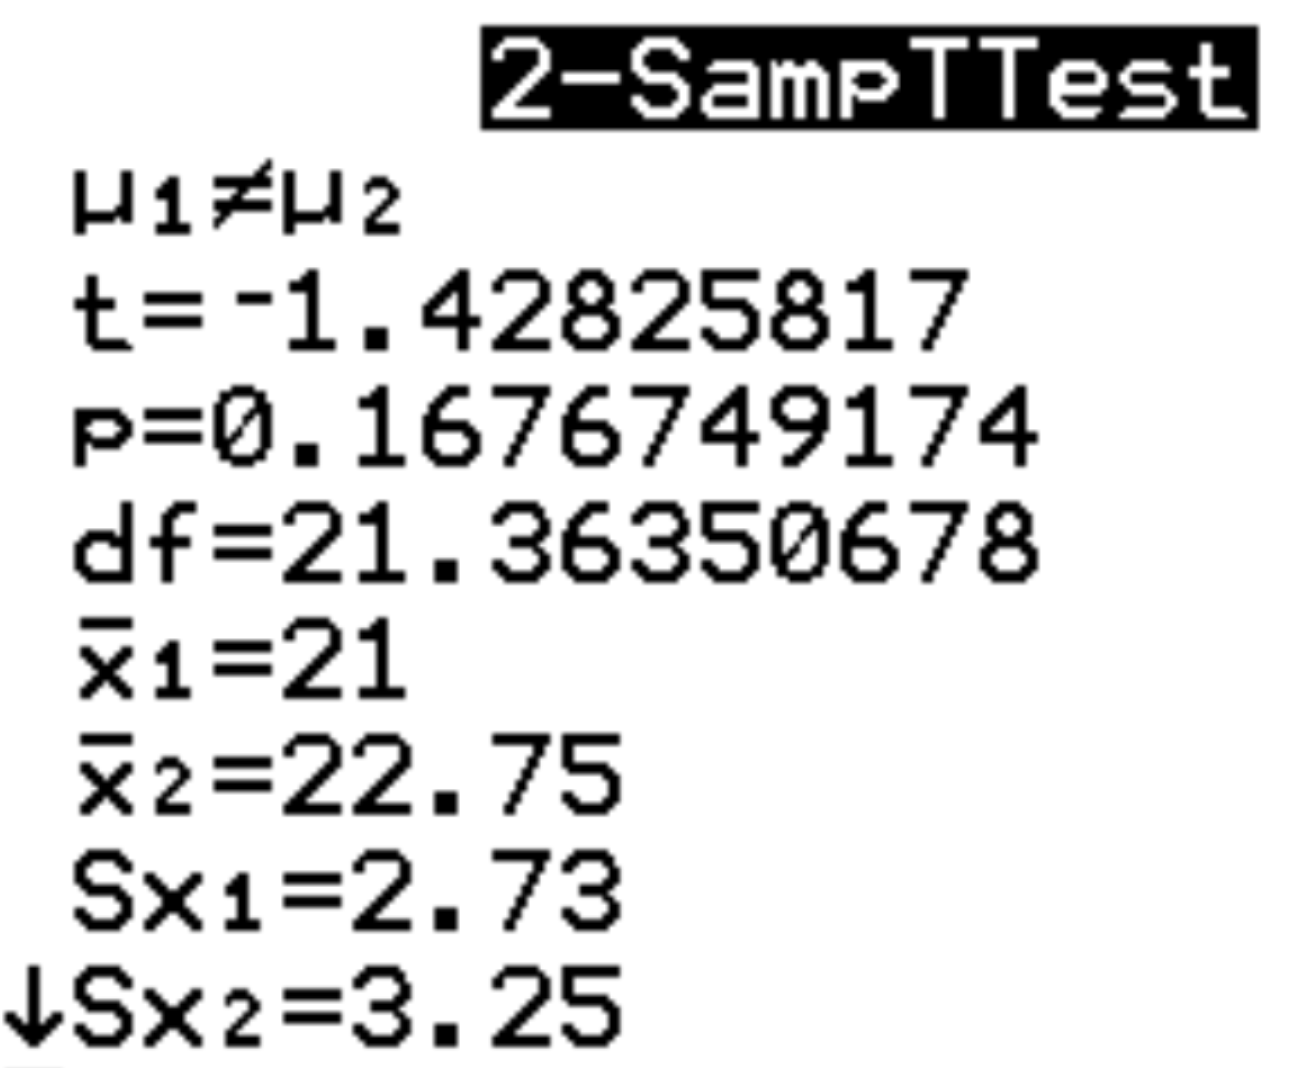 Output of two sample t-test on a TI-84 calculator